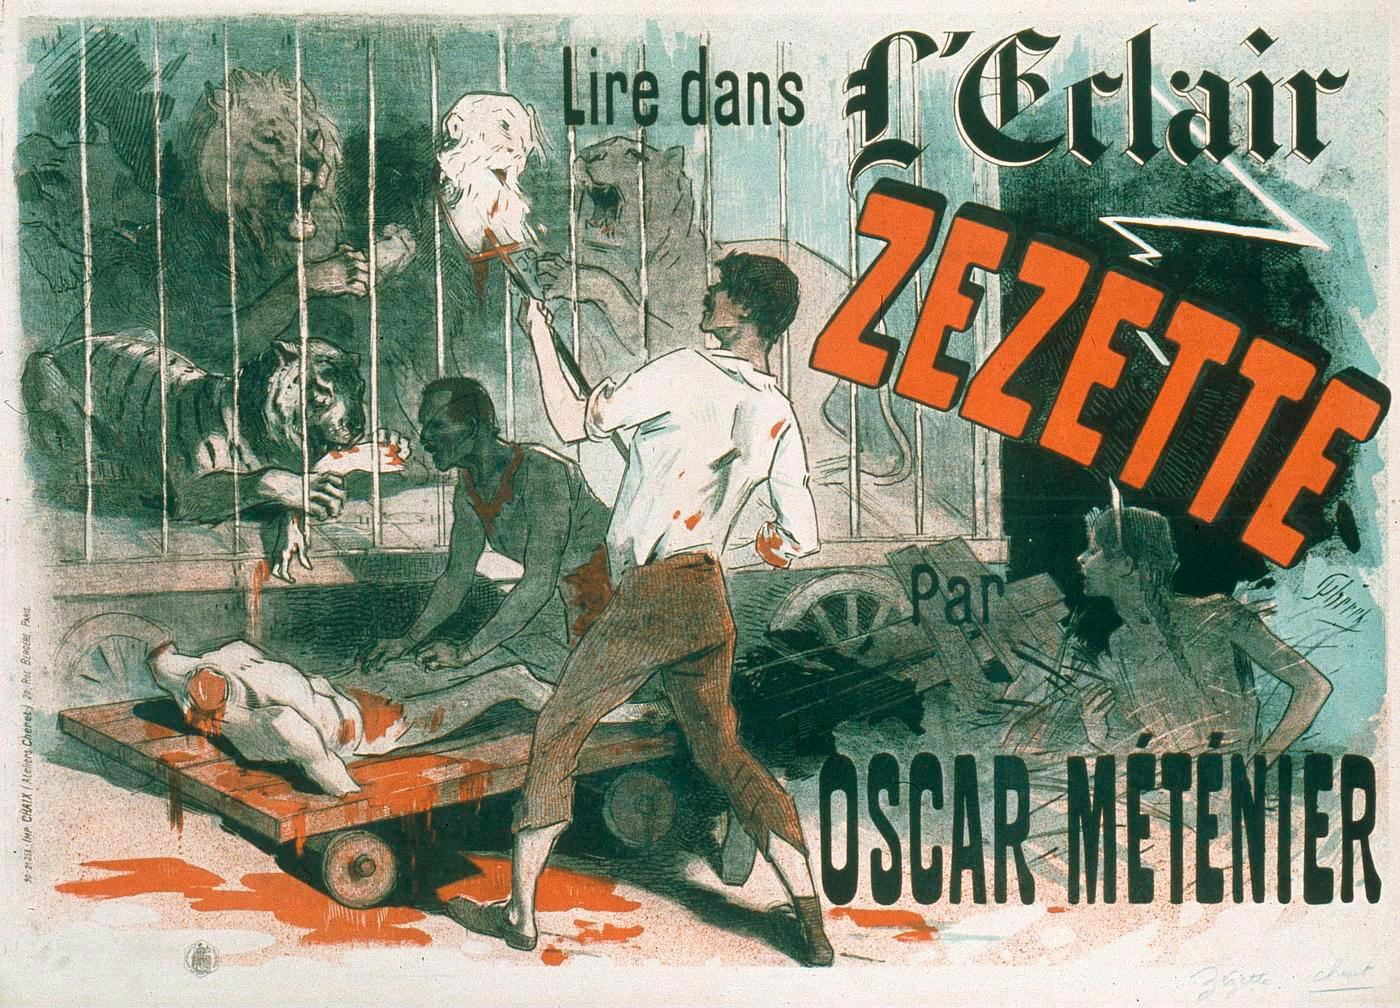 Jules Chéret and the transformation of the illustrated poster: innovations in lithography and the Belle Époque aesthetic